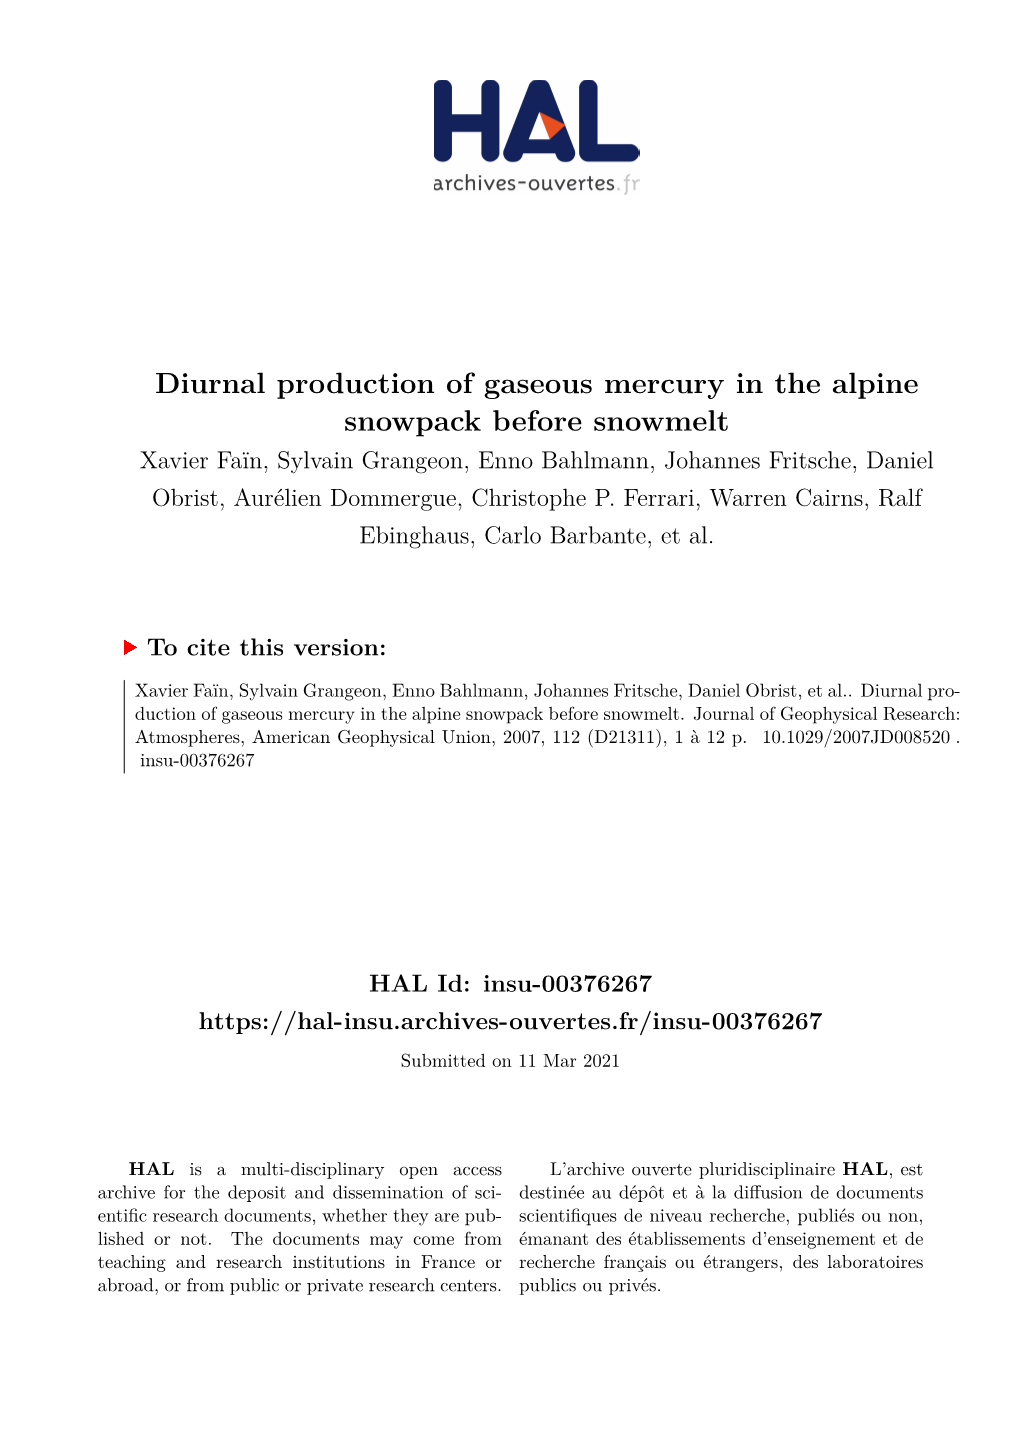 Diurnal Production of Gaseous Mercury in the Alpine